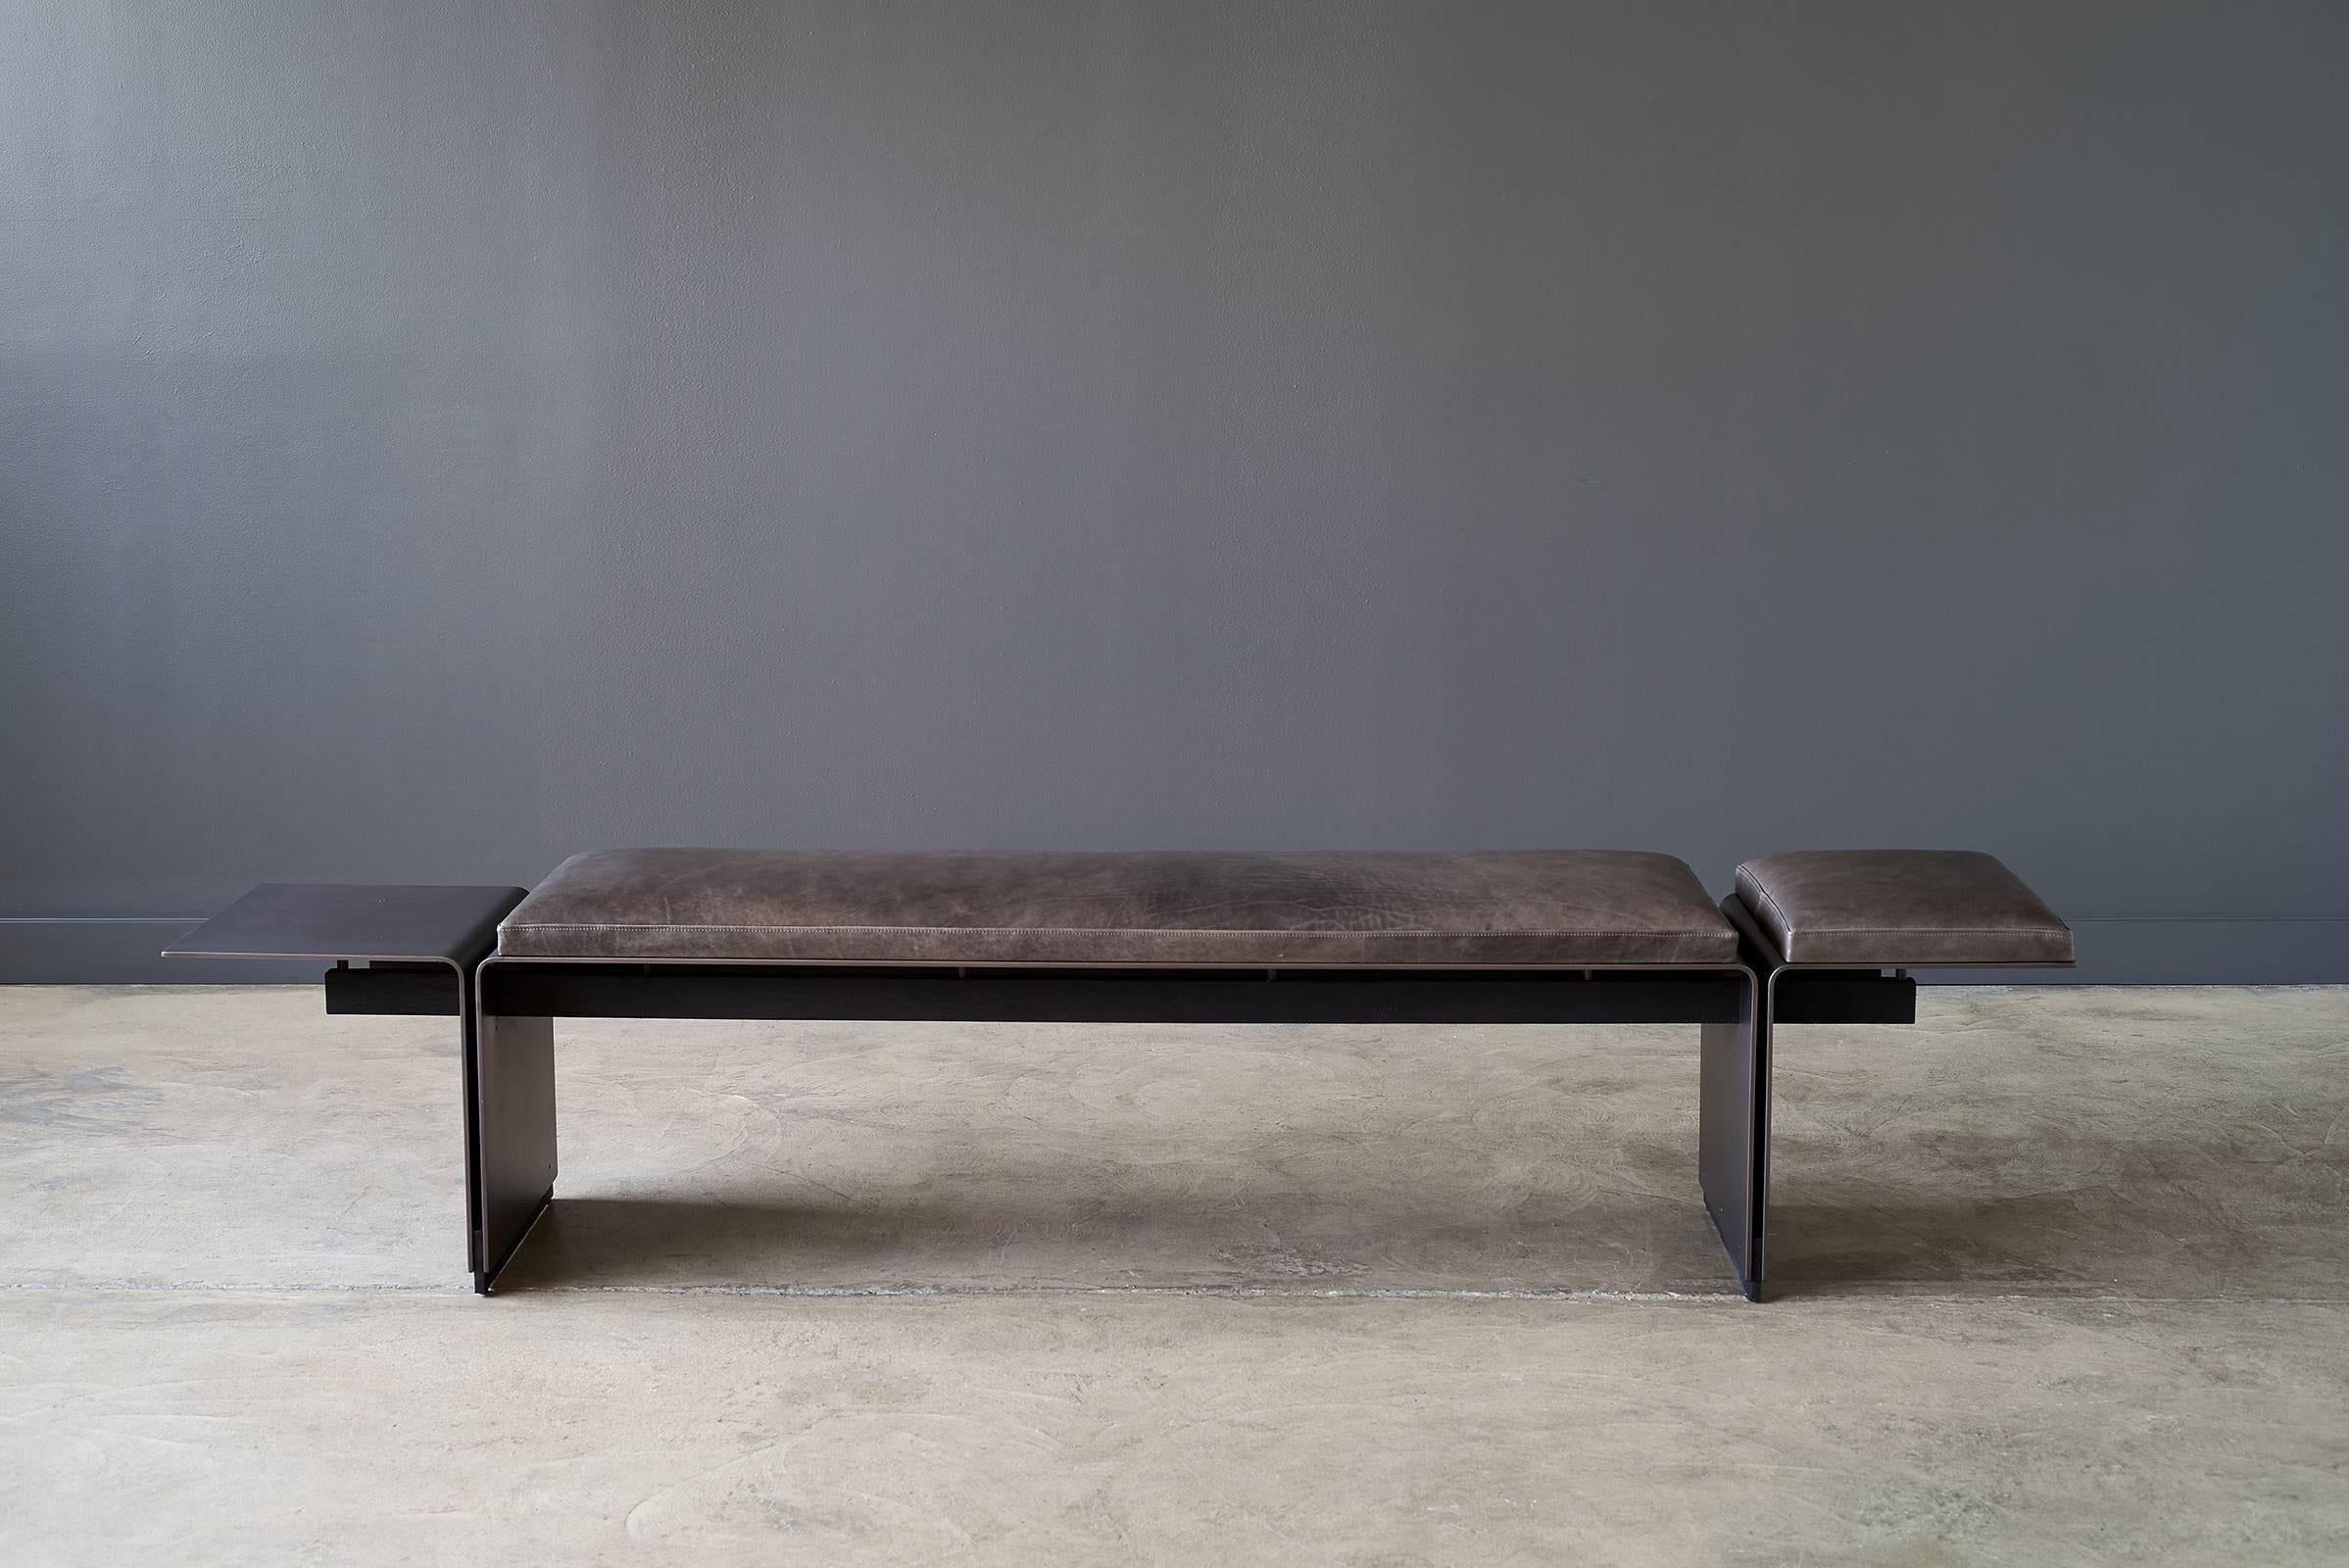 Handcrafted metal and wood bench seating created and designed in partnership with Workshop APD

Shown in Burnt Steel, Black Walnut and Garrett Distressed Anthracite

Measures: 85in x 16in x 17.5in H

Each Desiron piece is fully customizable and